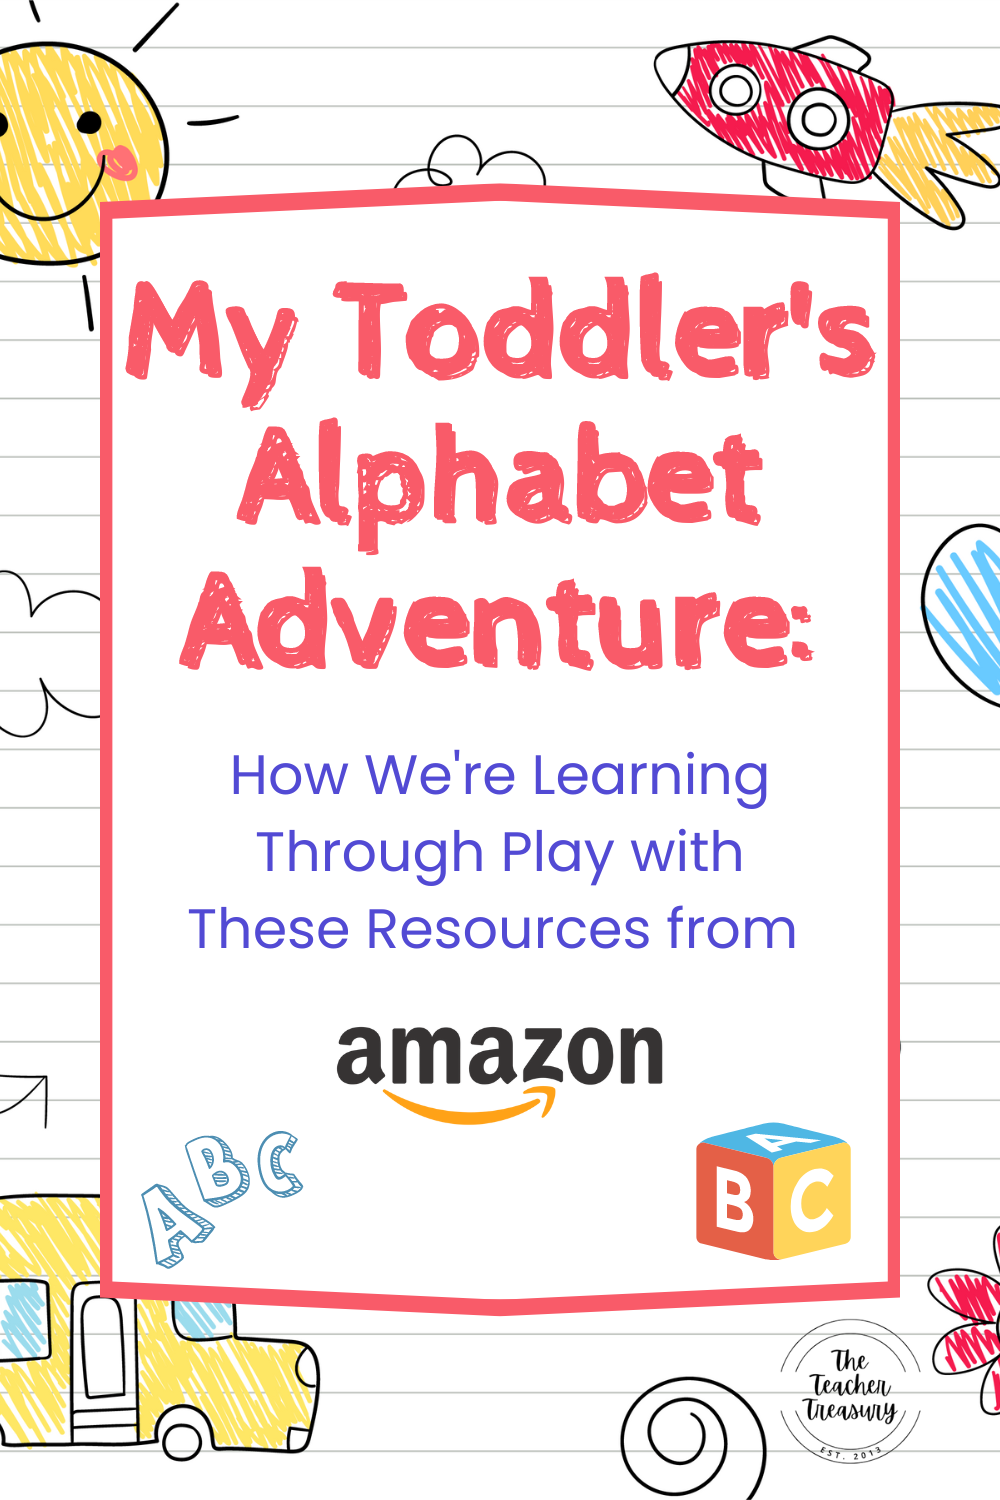 Learning Through Play with These Resources from Amazon